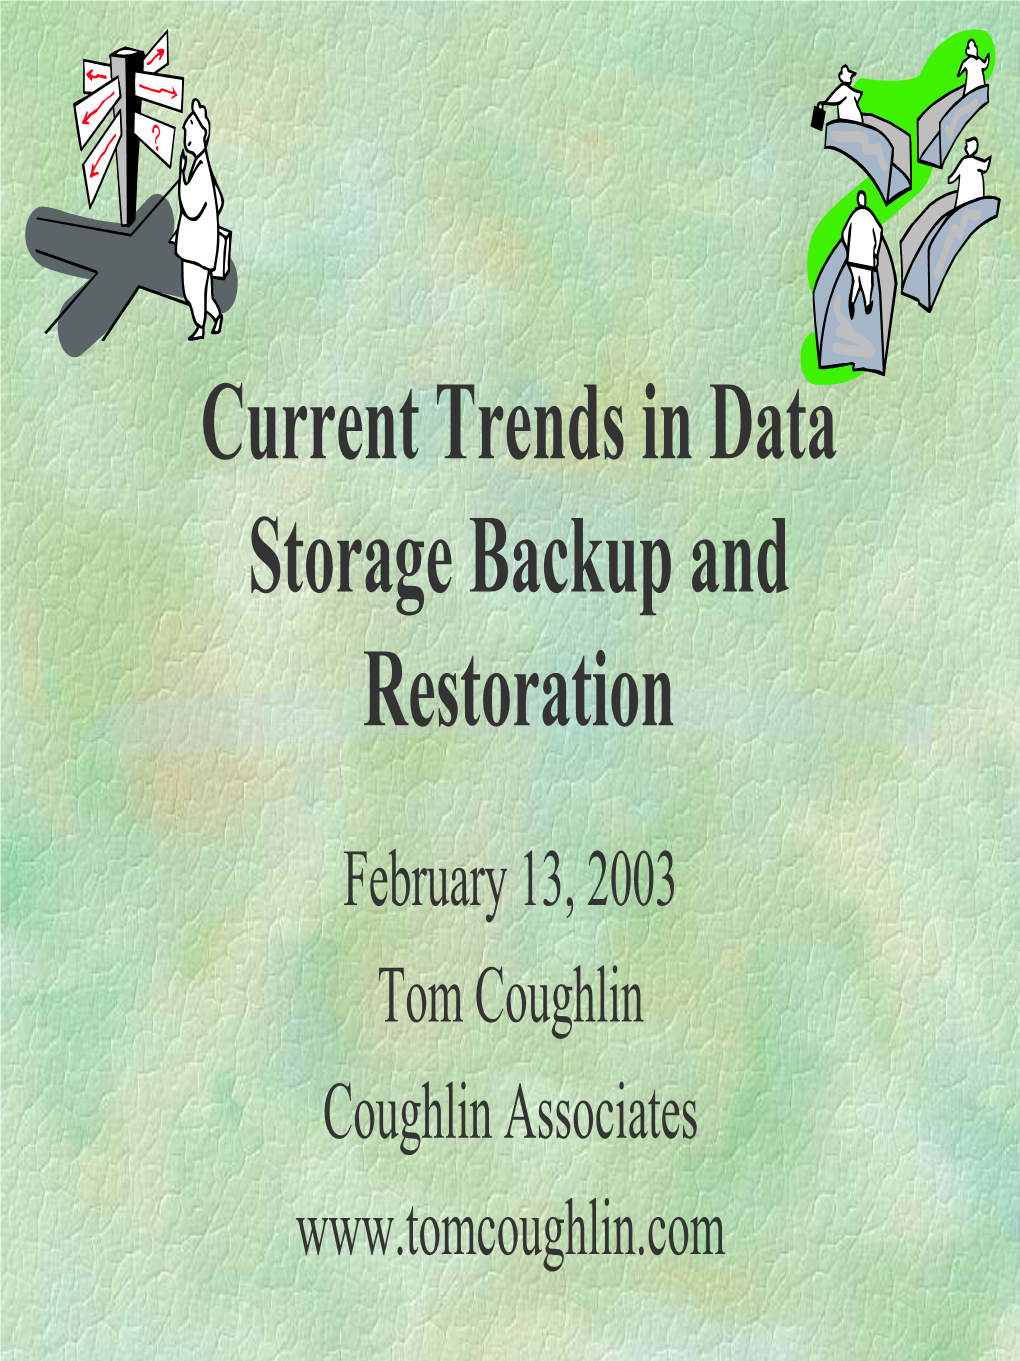 Current Trends in Data Storage Backup and Restoration